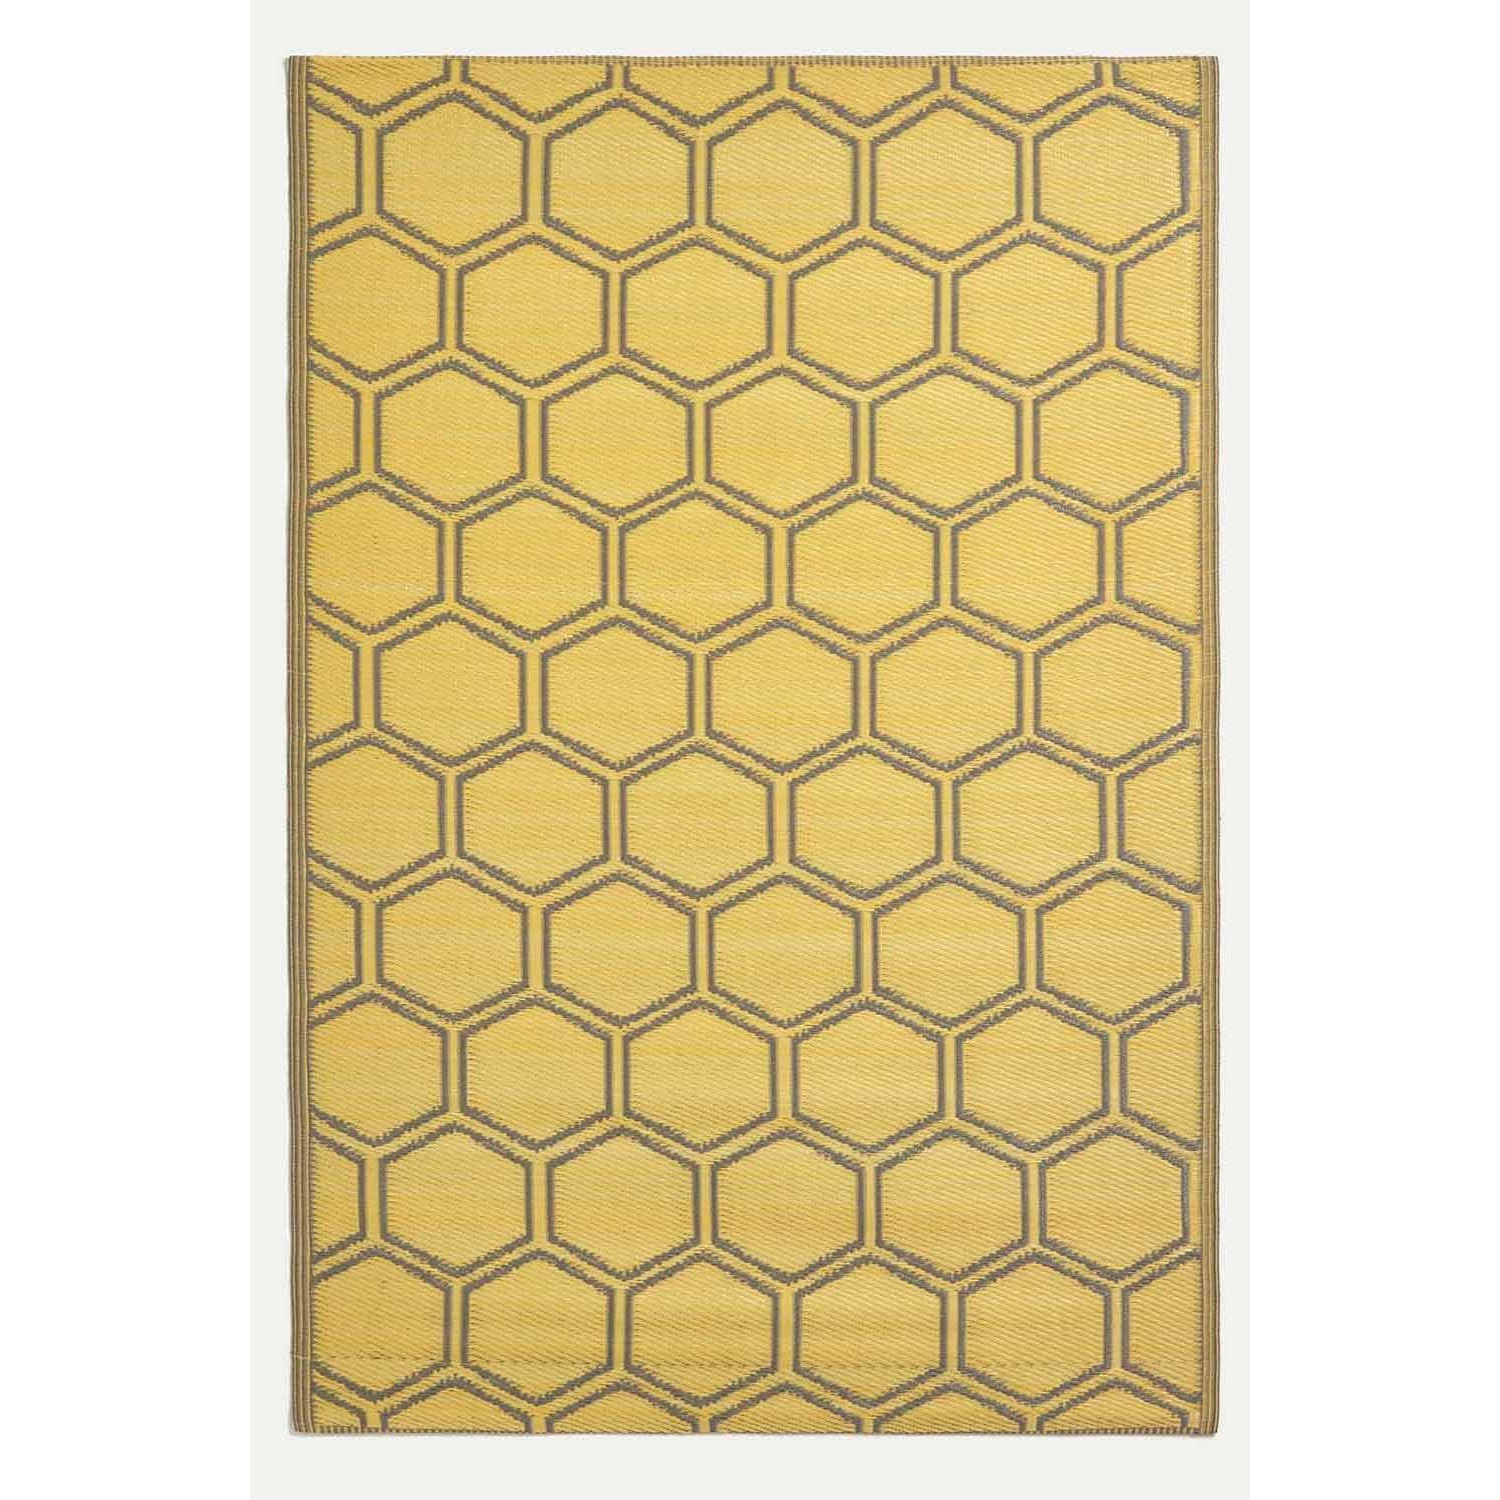 Yellow Outdoor Rug with Honeycomb Pattern, 182 x 122 cm - image 1